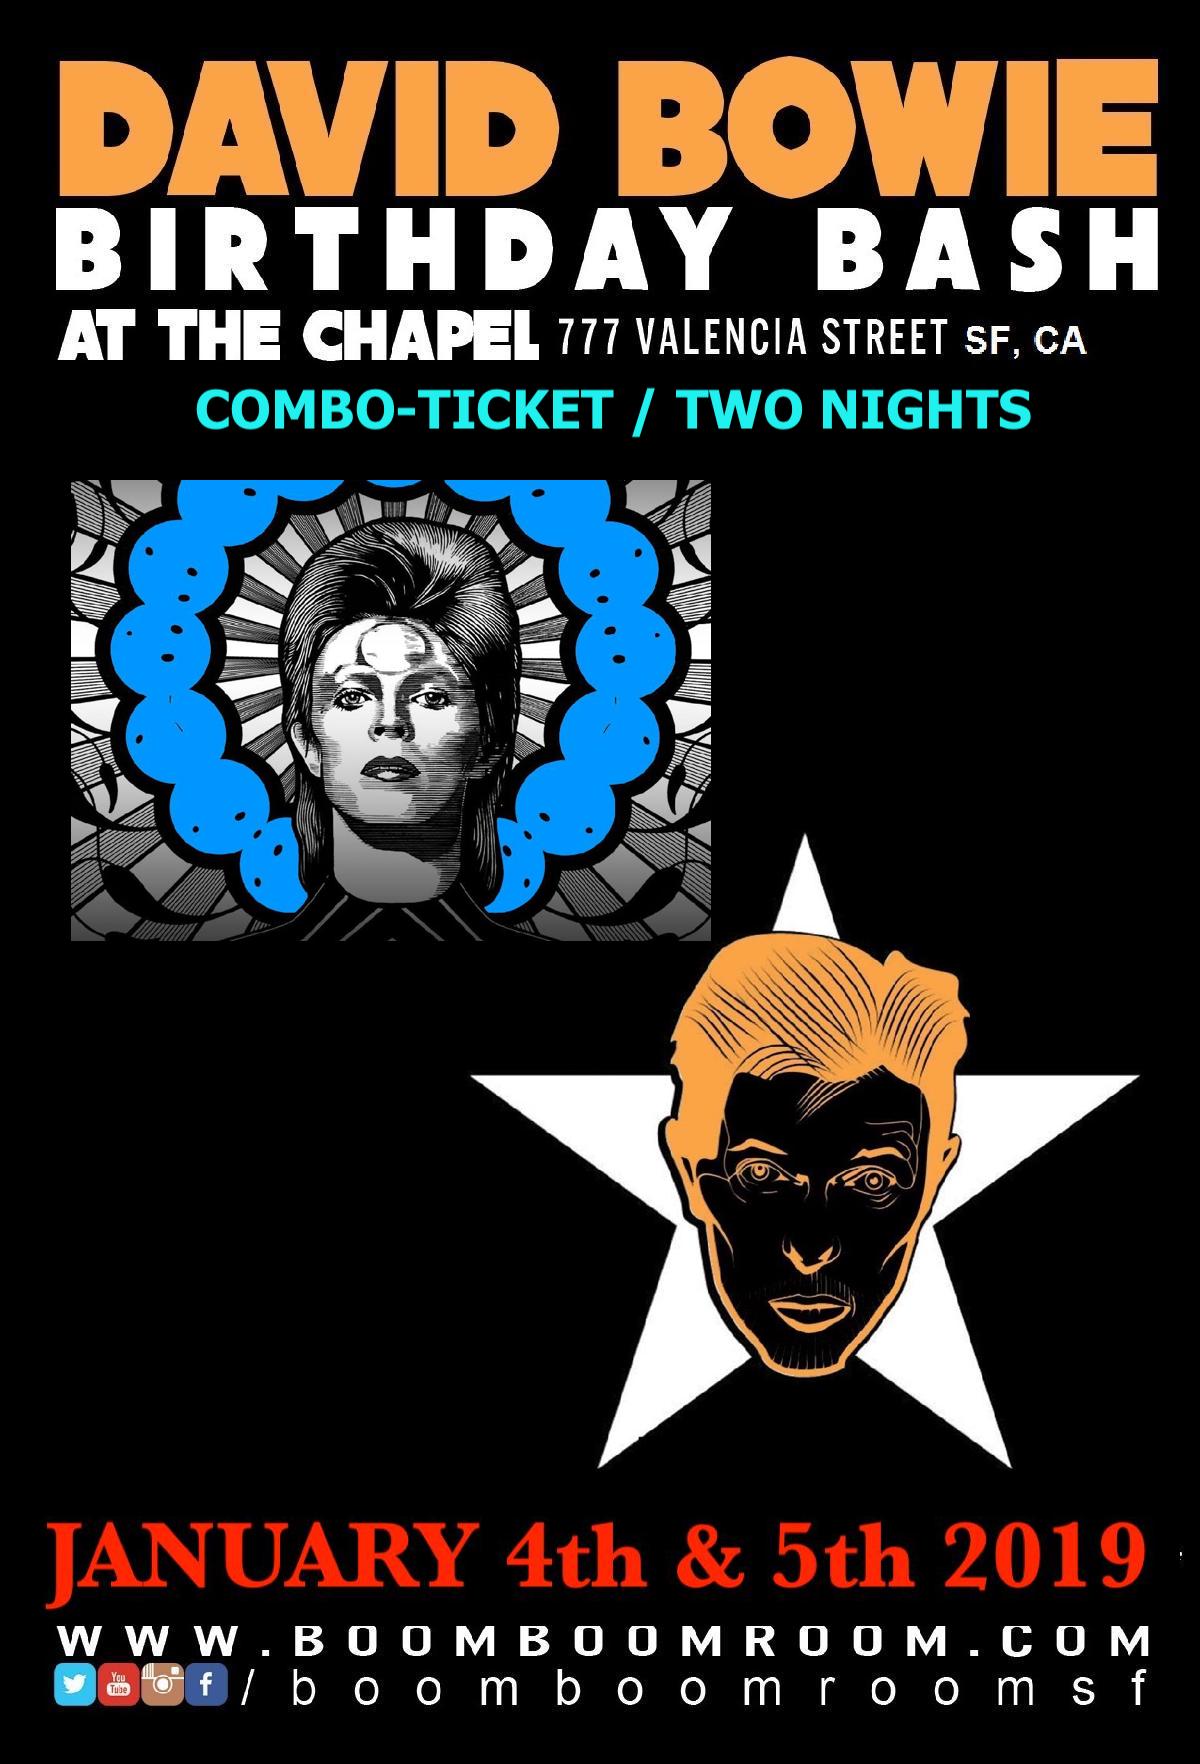 DAVID BOWIE BASH two nights) The CHAPEL Tickets 01/04/19